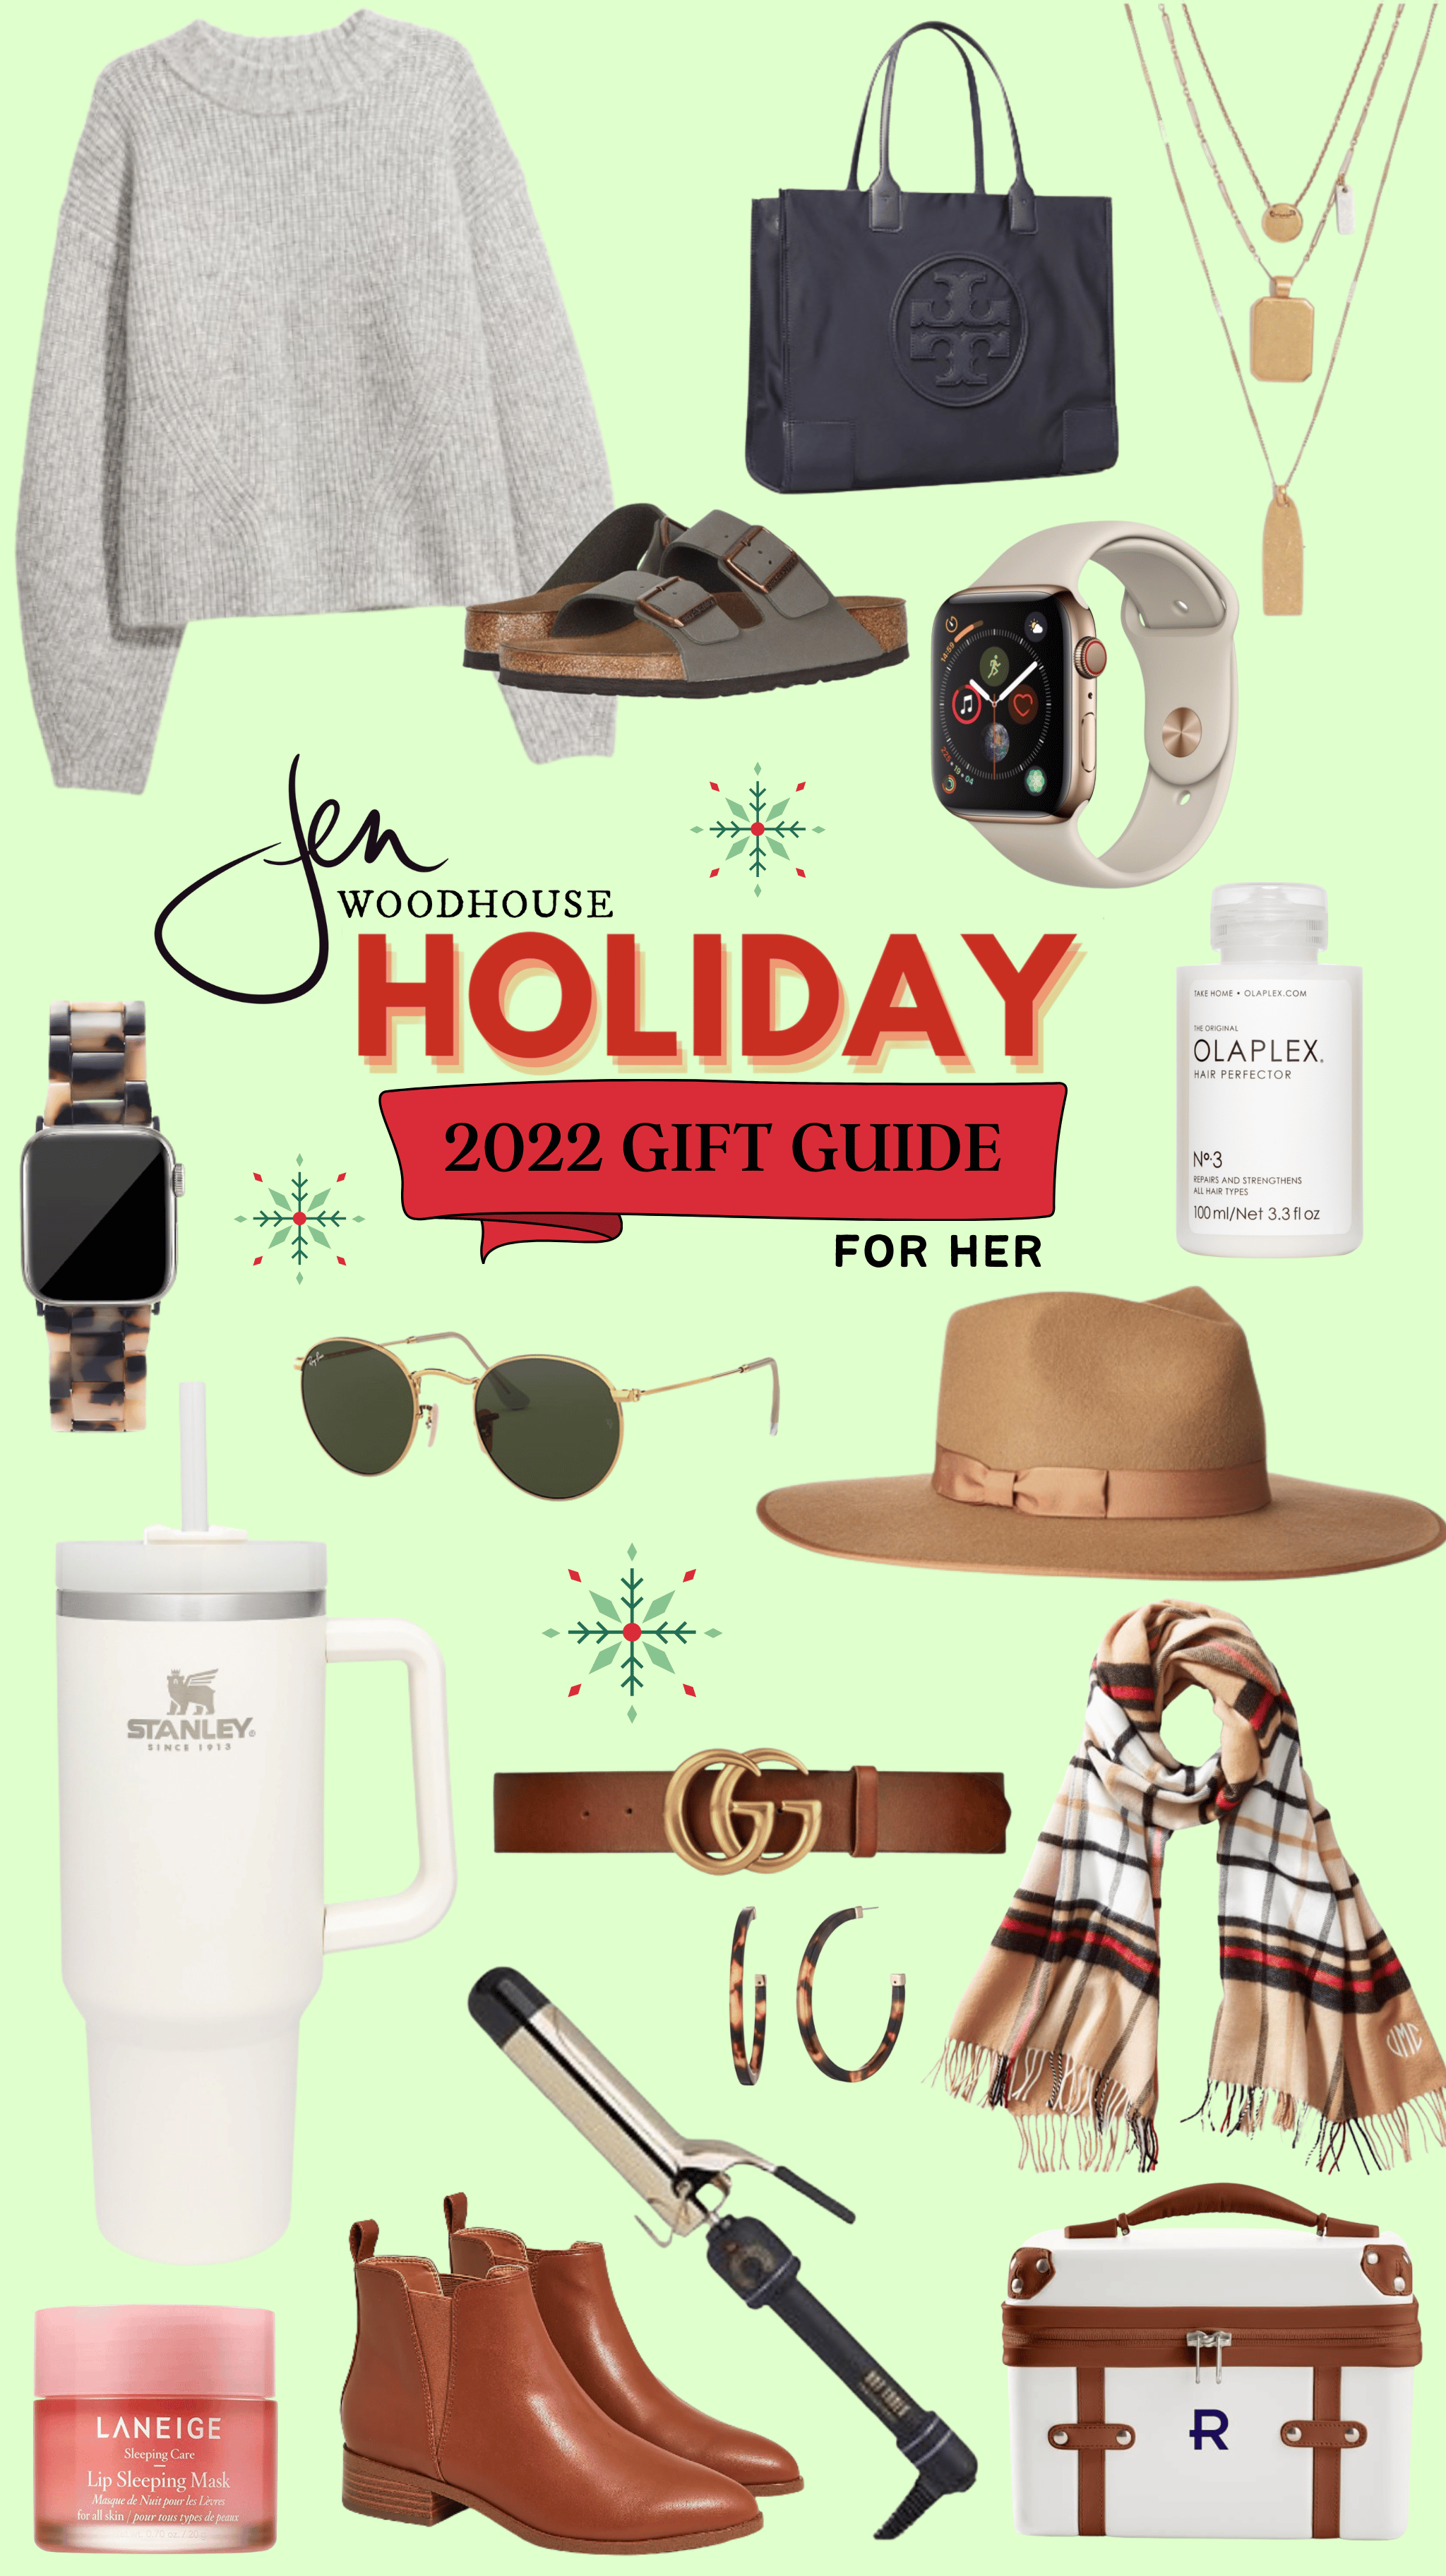 2022 Holiday Gift Guide: Gifts for Her — House by the Preserve